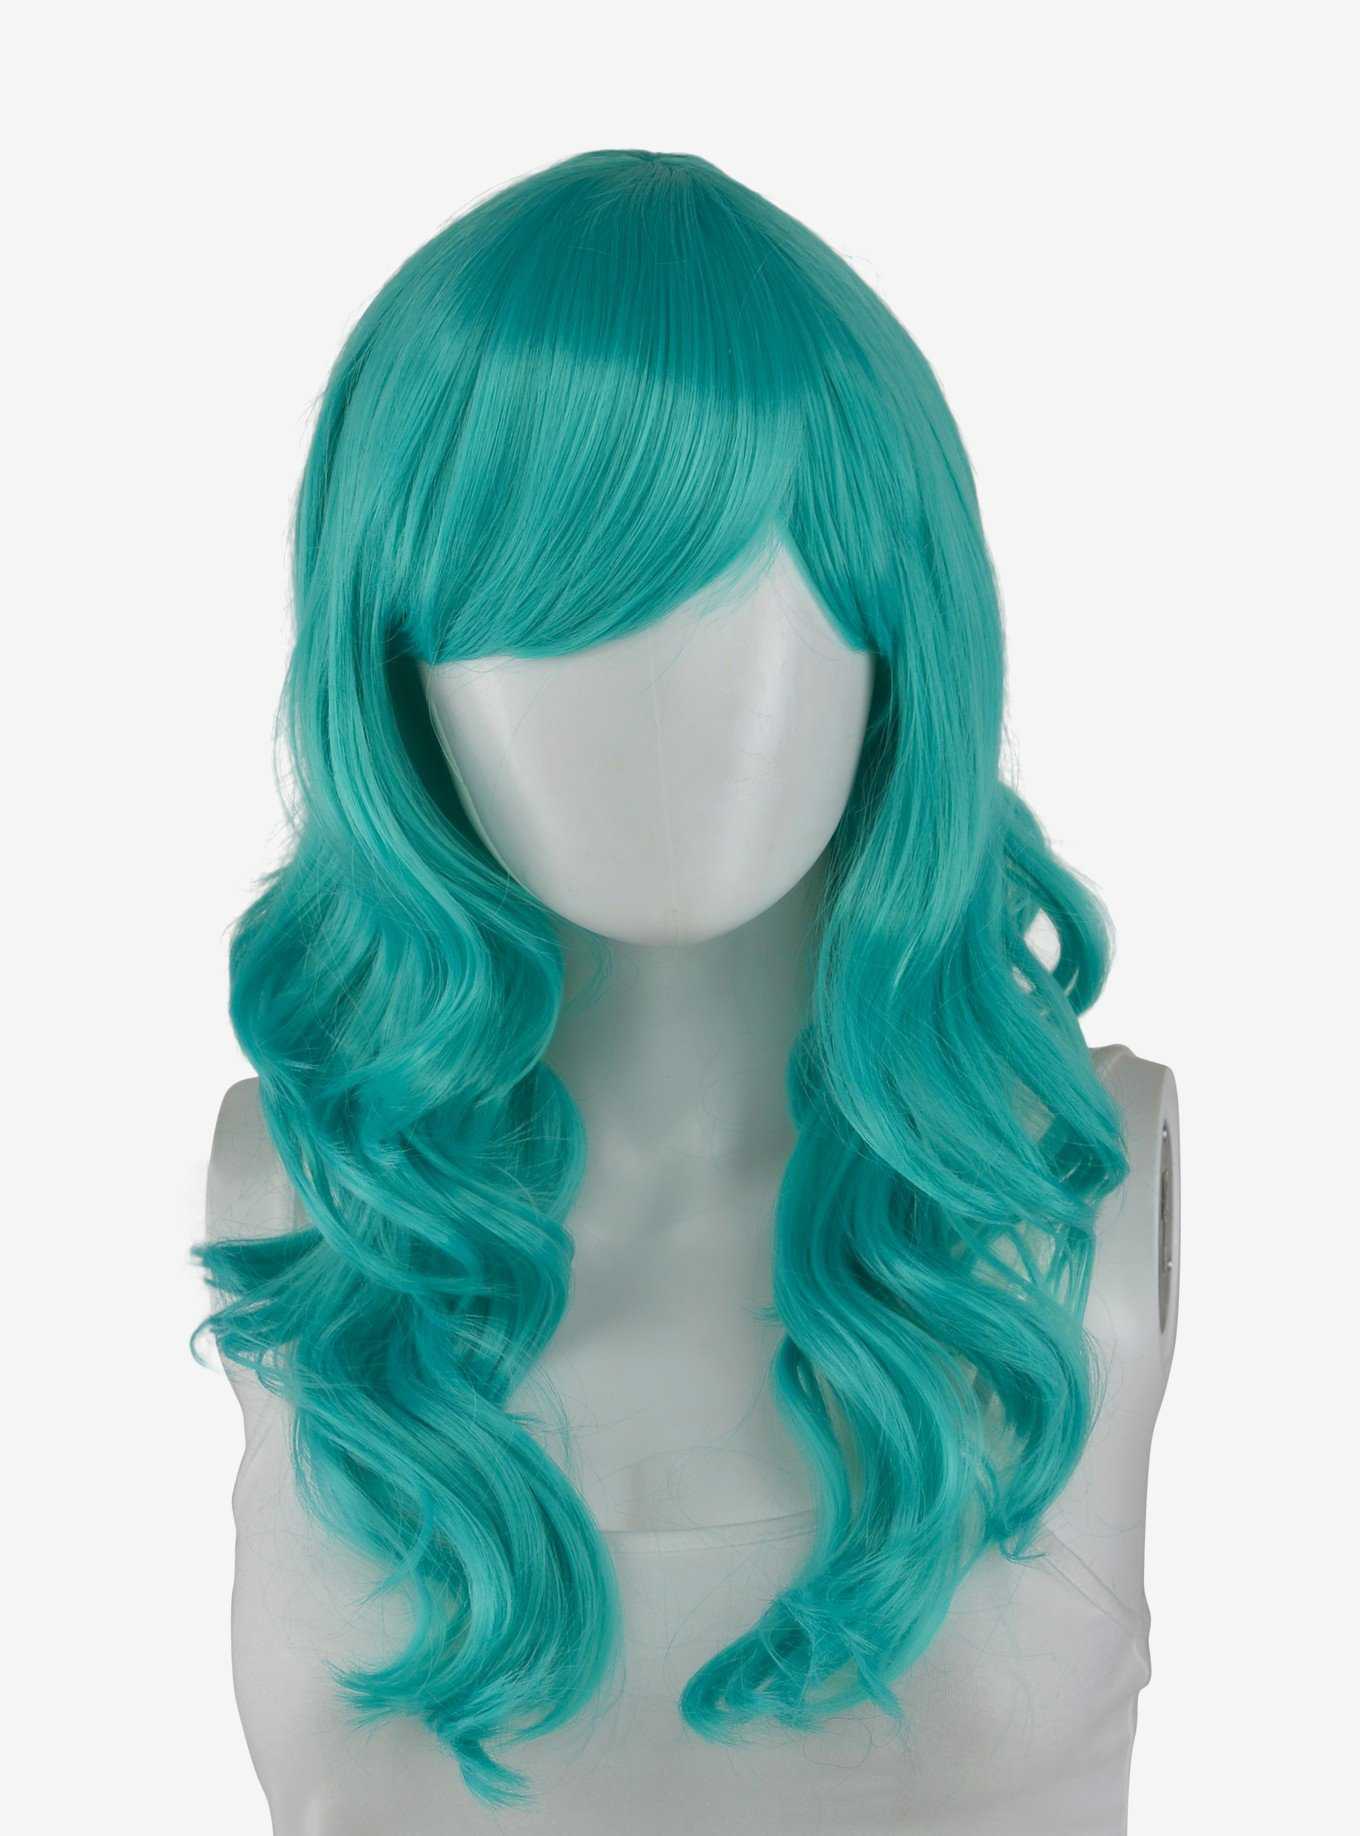 Epic Cosplay Hestia Vocaloid Green Shoulder Length Curly Wig, , hi-res